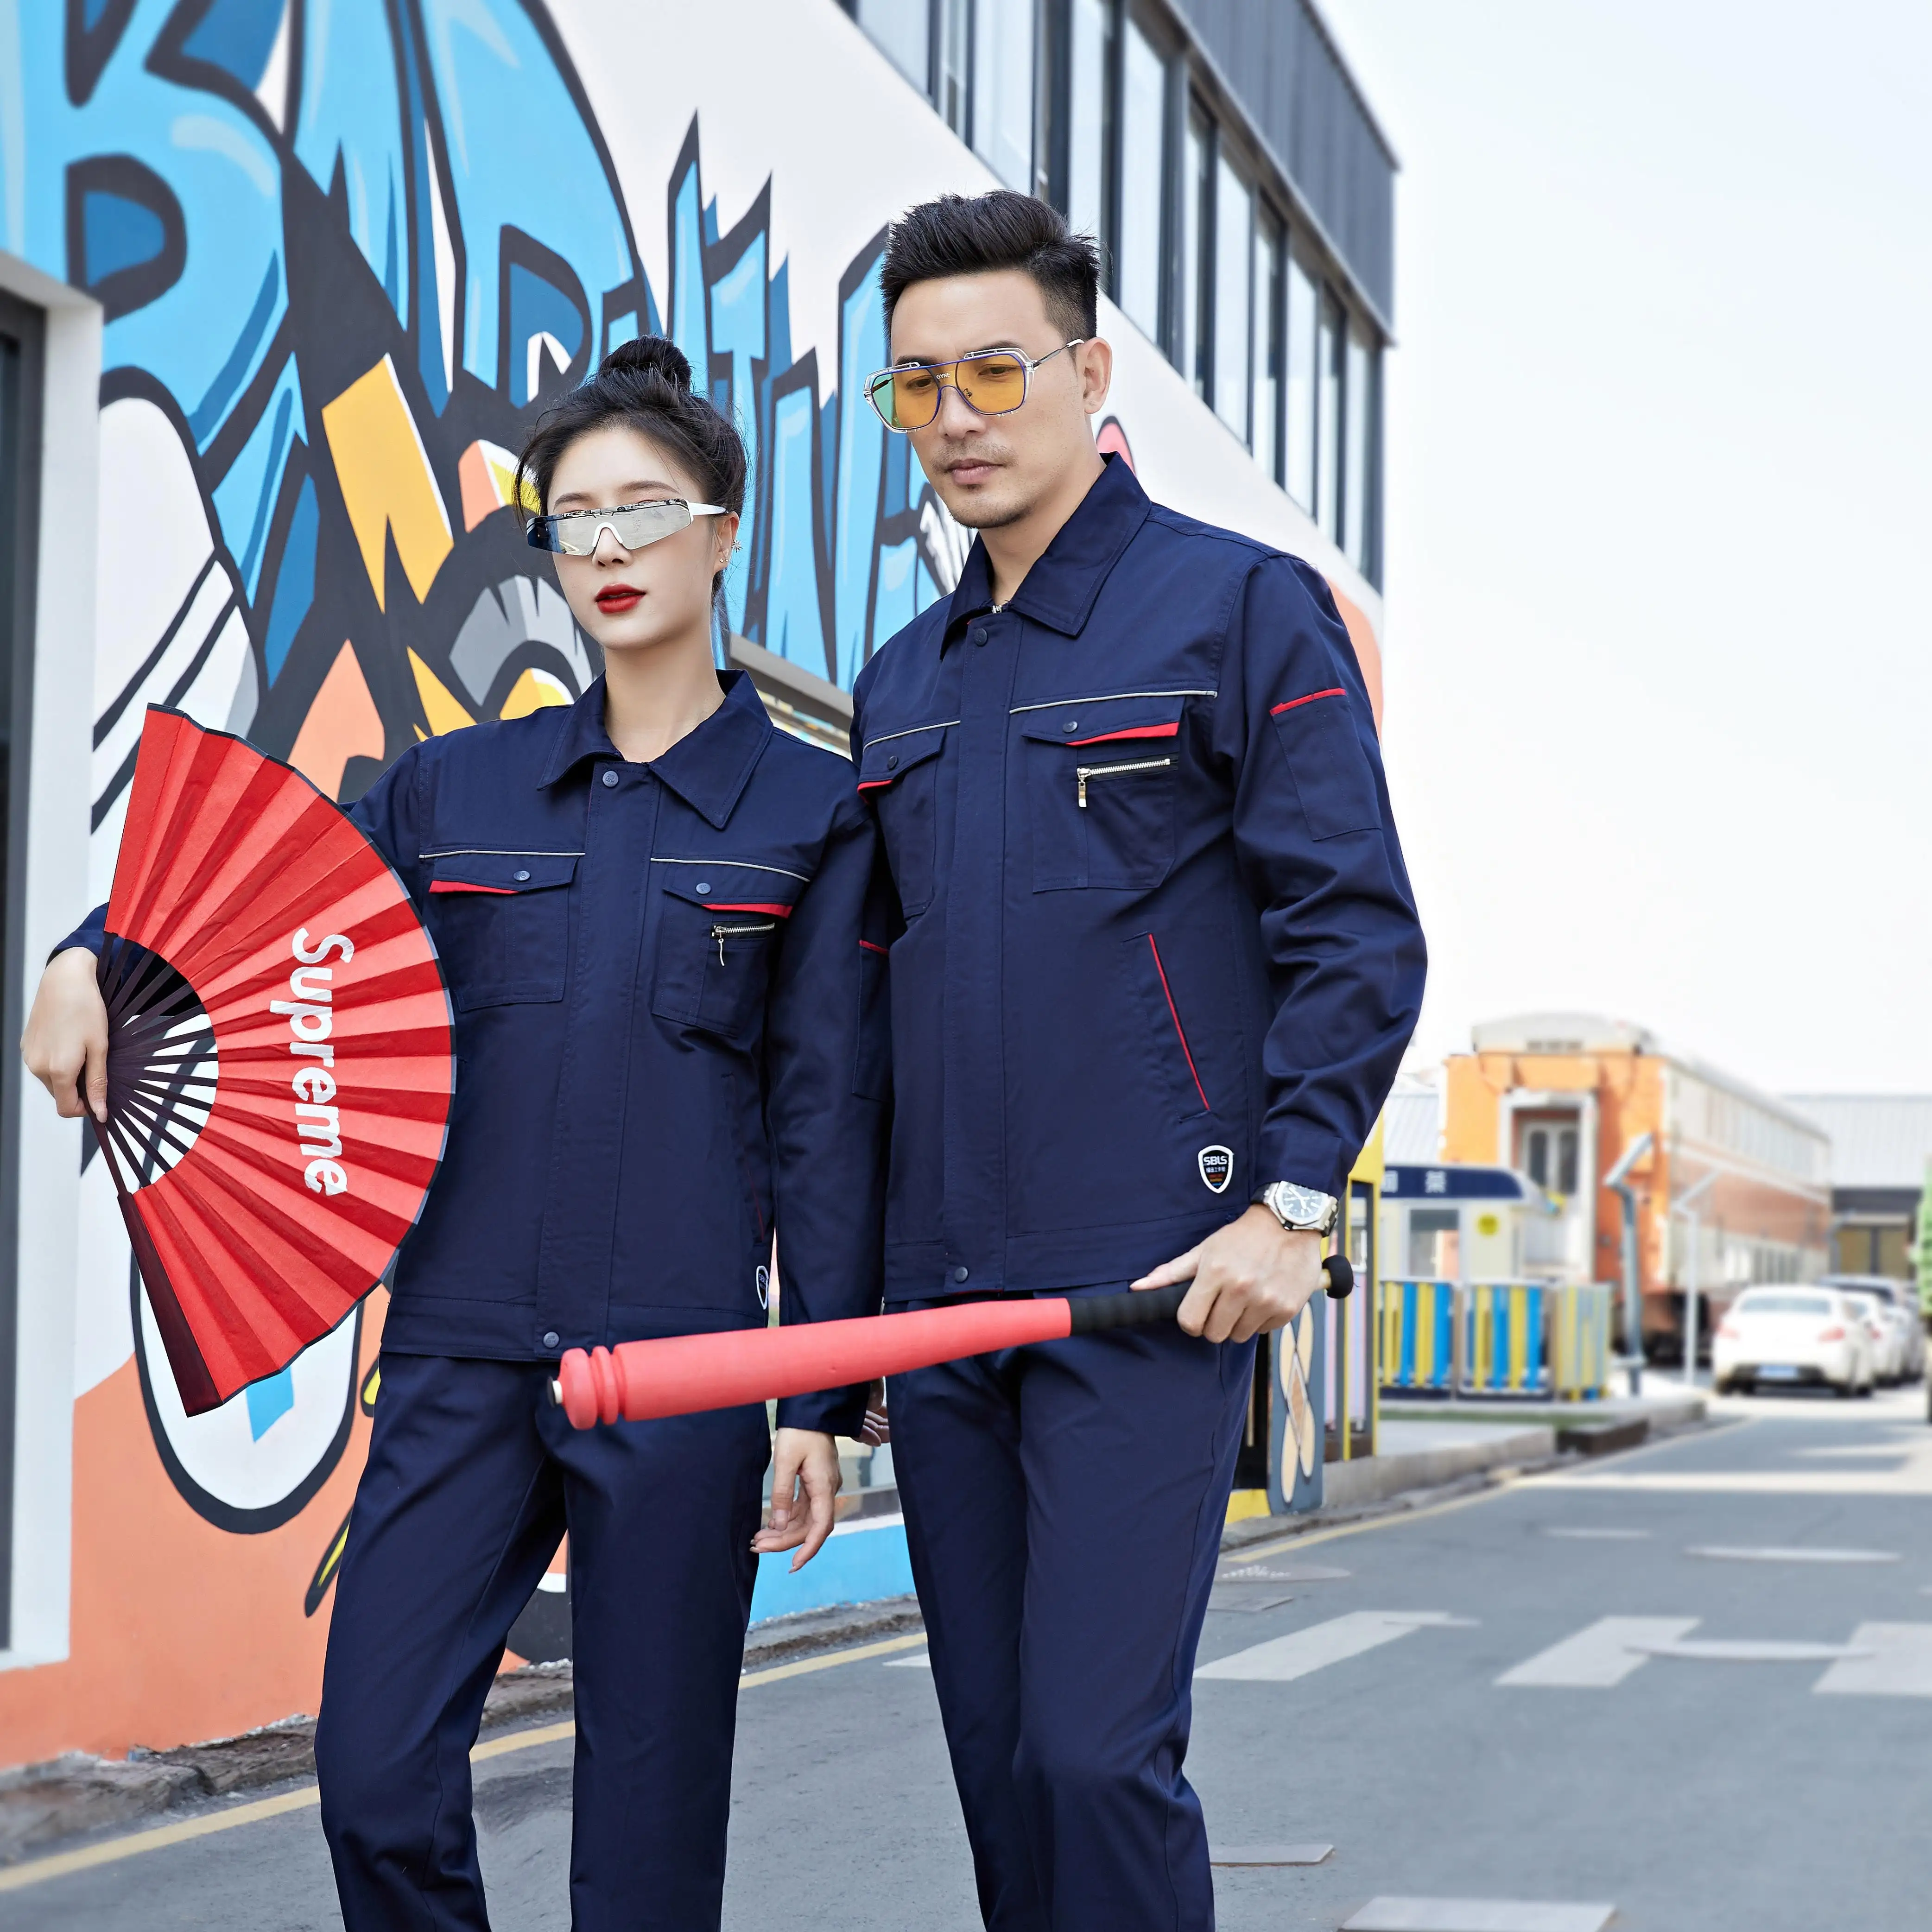 60% cotton 40% Polyester Summer Men two piece jacket Outdoor Work Wear Uniforms Shirt insulated coverall suits workwear